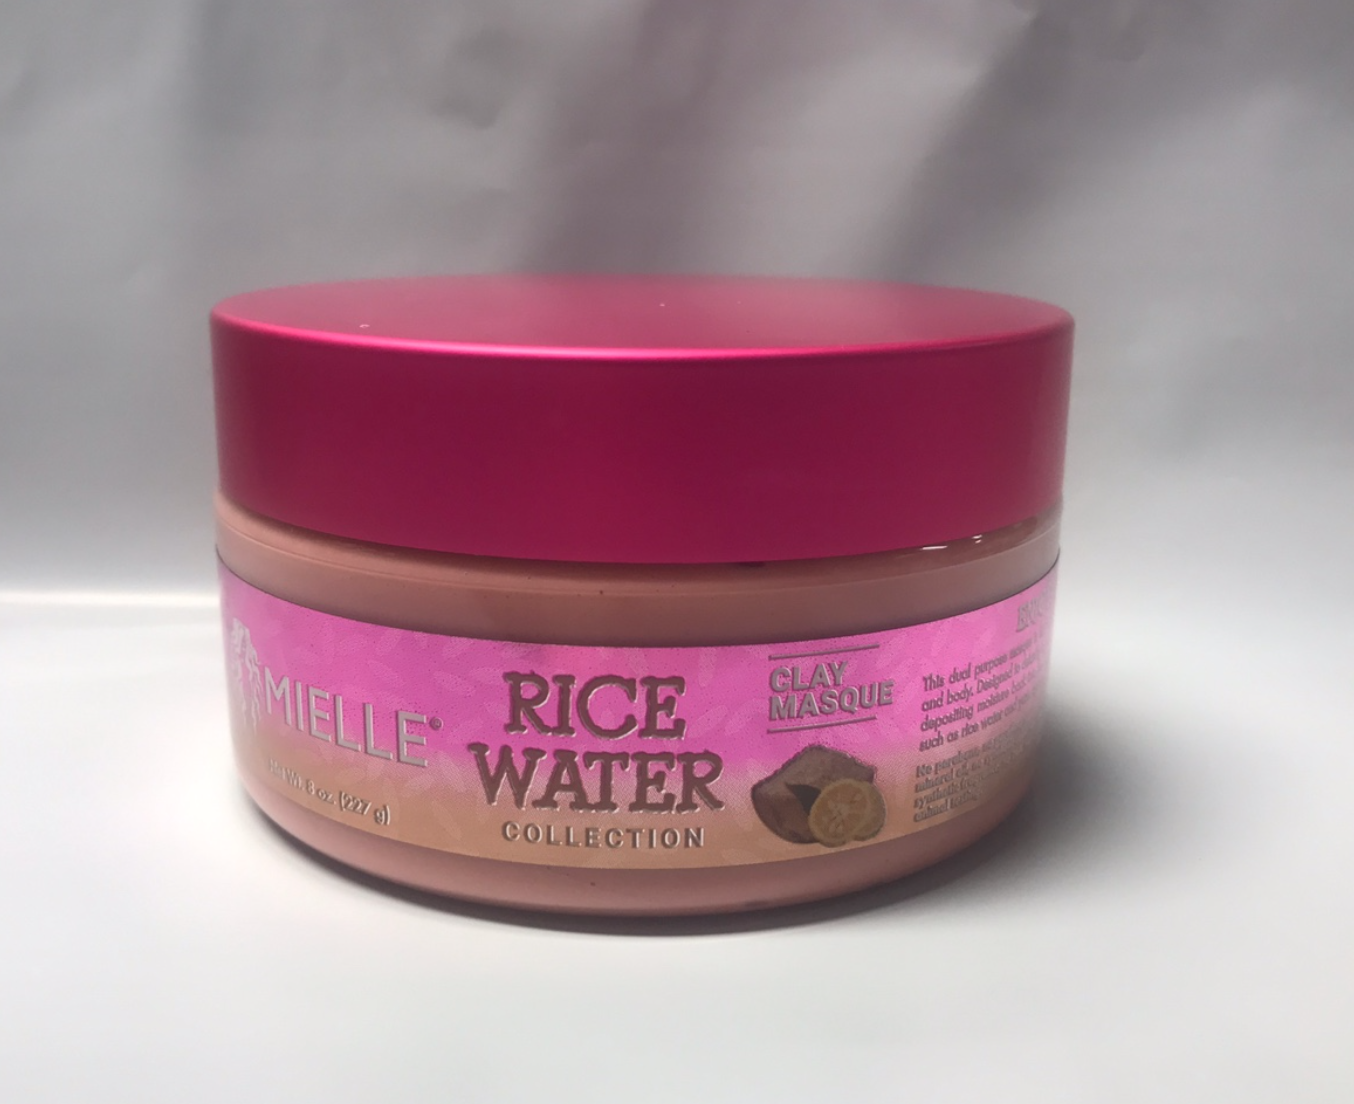 Primary image for MIELLE RICE WATER COLLECTION CLAY MASQUE  8 oz.